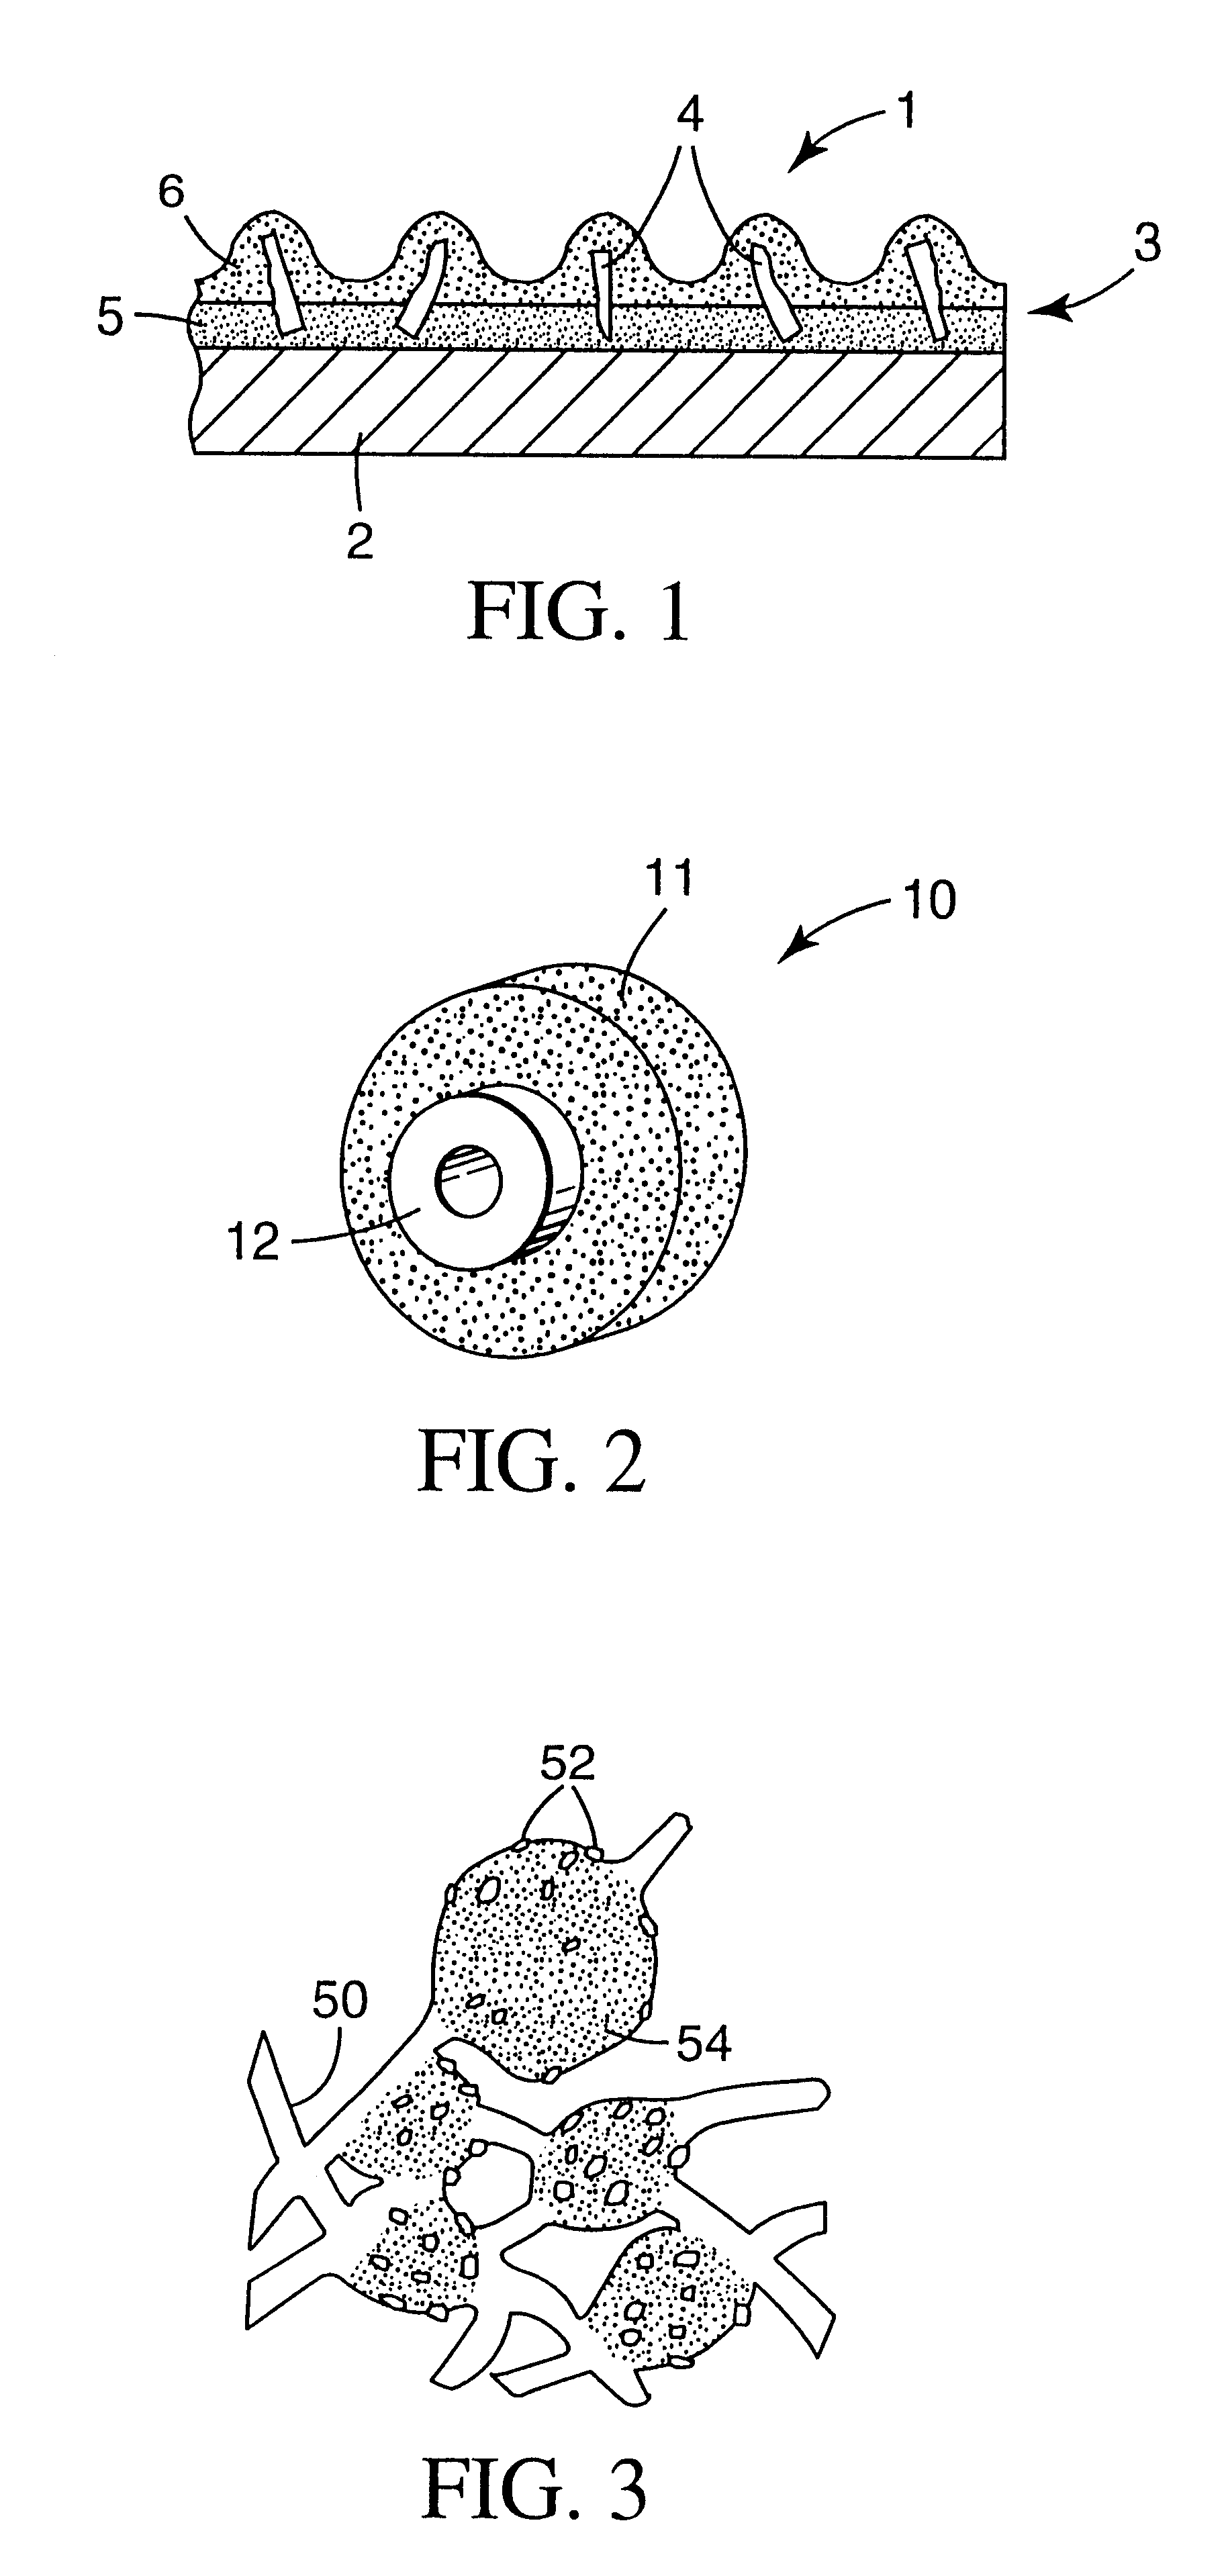 Abrasive grain, abrasive articles, and methods of making and using the same